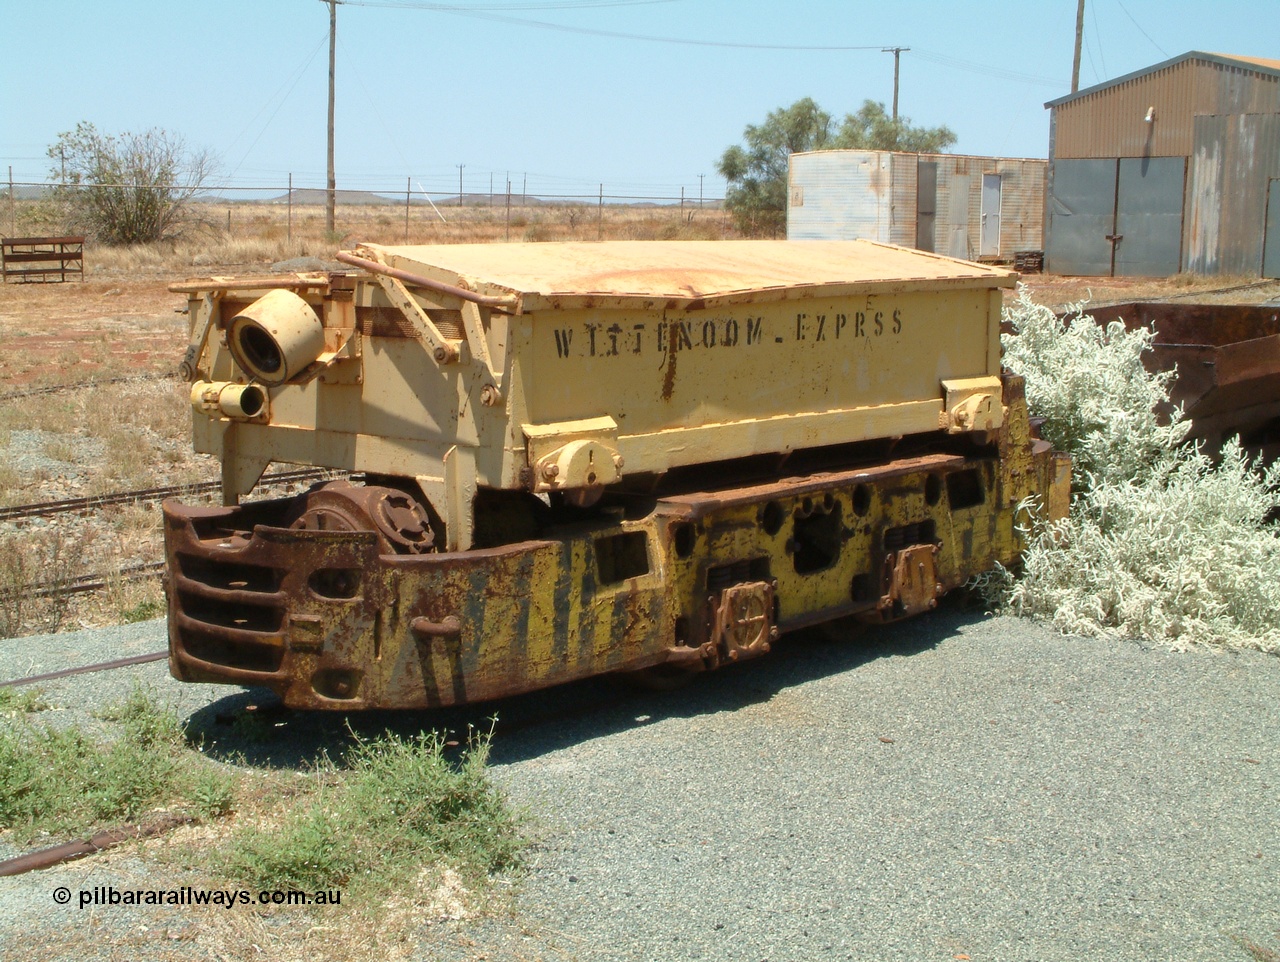 041014 122804
Pilbara Railways Historical Society, Mancha battery hauler from the former CSR underground blue asbestos mine at Wittenoom, driving position is at the rear in this shot. Shows misspelling on the side of EXPRSS rather than express. Donated to the Society in 2003. 14th October 2004.
Keywords: Mancha